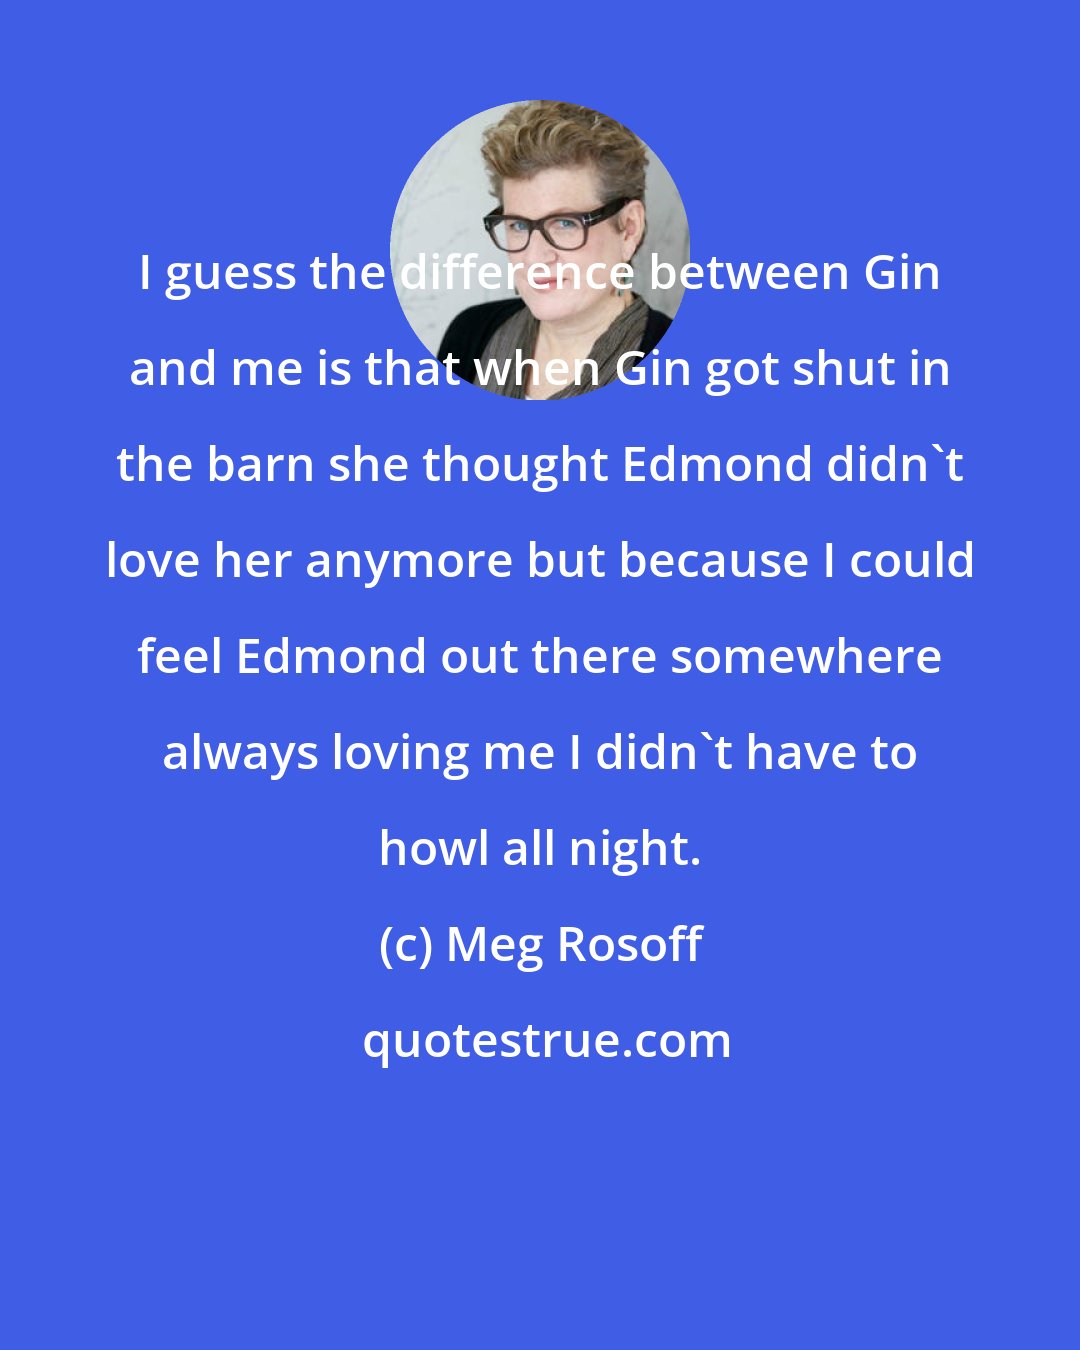 Meg Rosoff: I guess the difference between Gin and me is that when Gin got shut in the barn she thought Edmond didn't love her anymore but because I could feel Edmond out there somewhere always loving me I didn't have to howl all night.